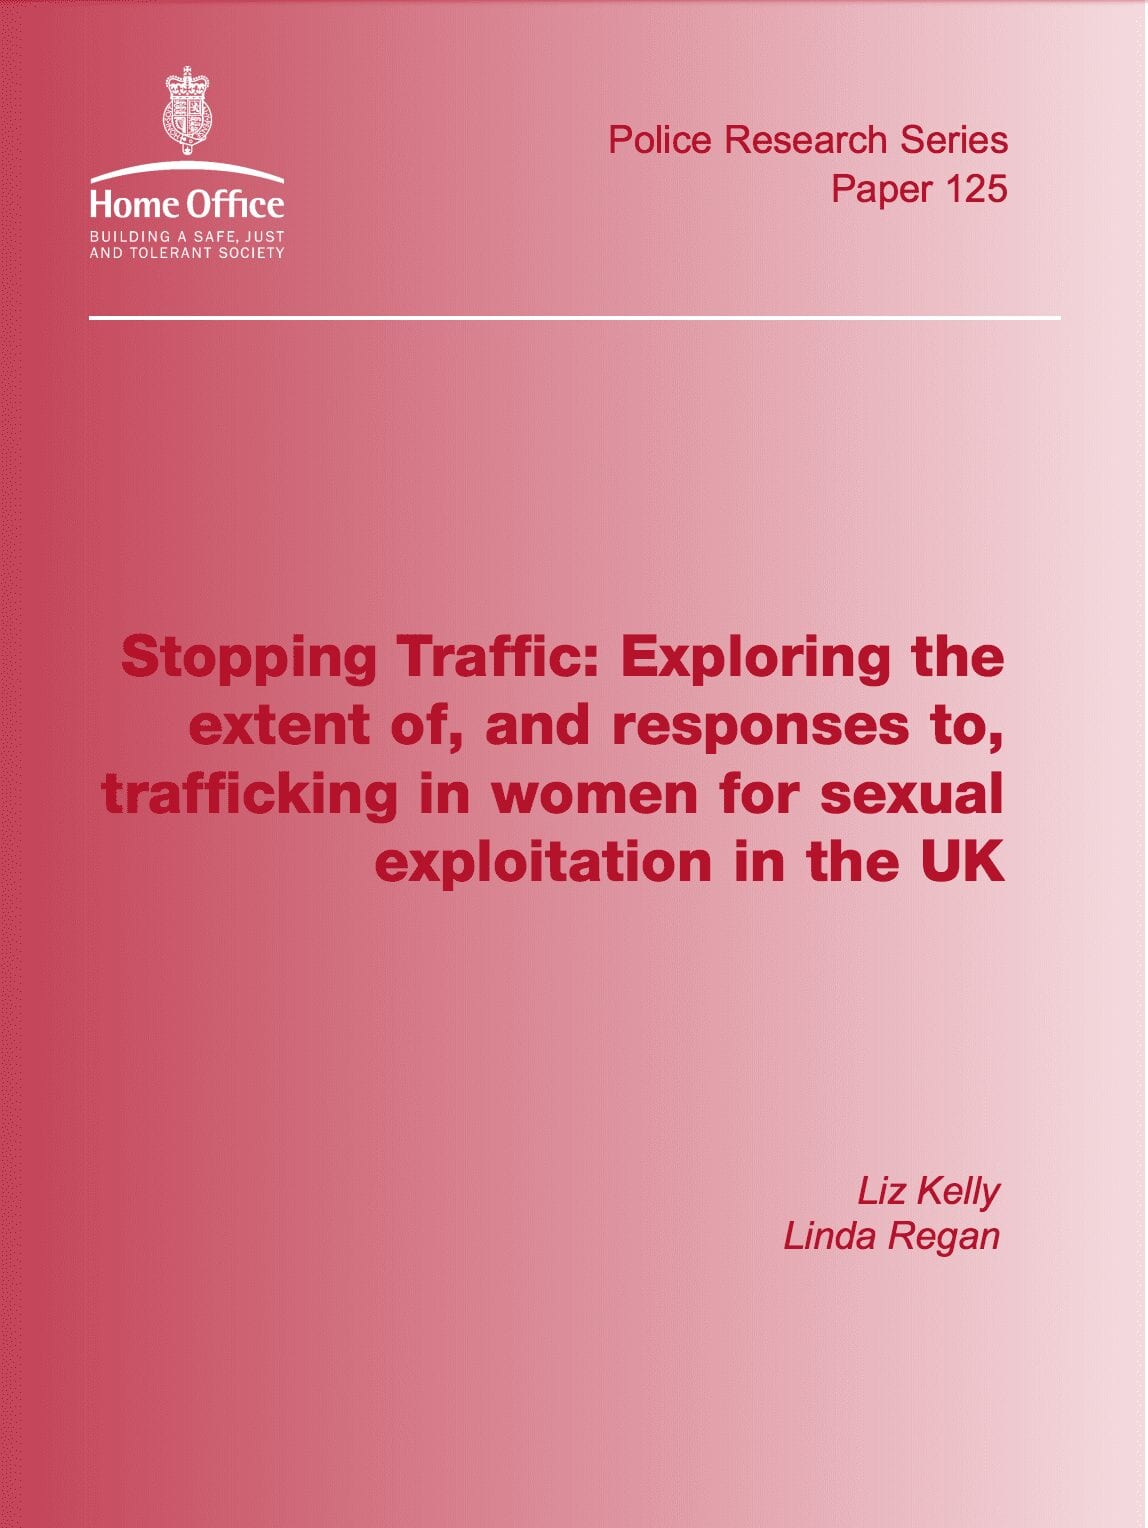 Stopping Traffic: Exploring the extent of, and responses to, trafficking in women for sexual exploitation in the UK